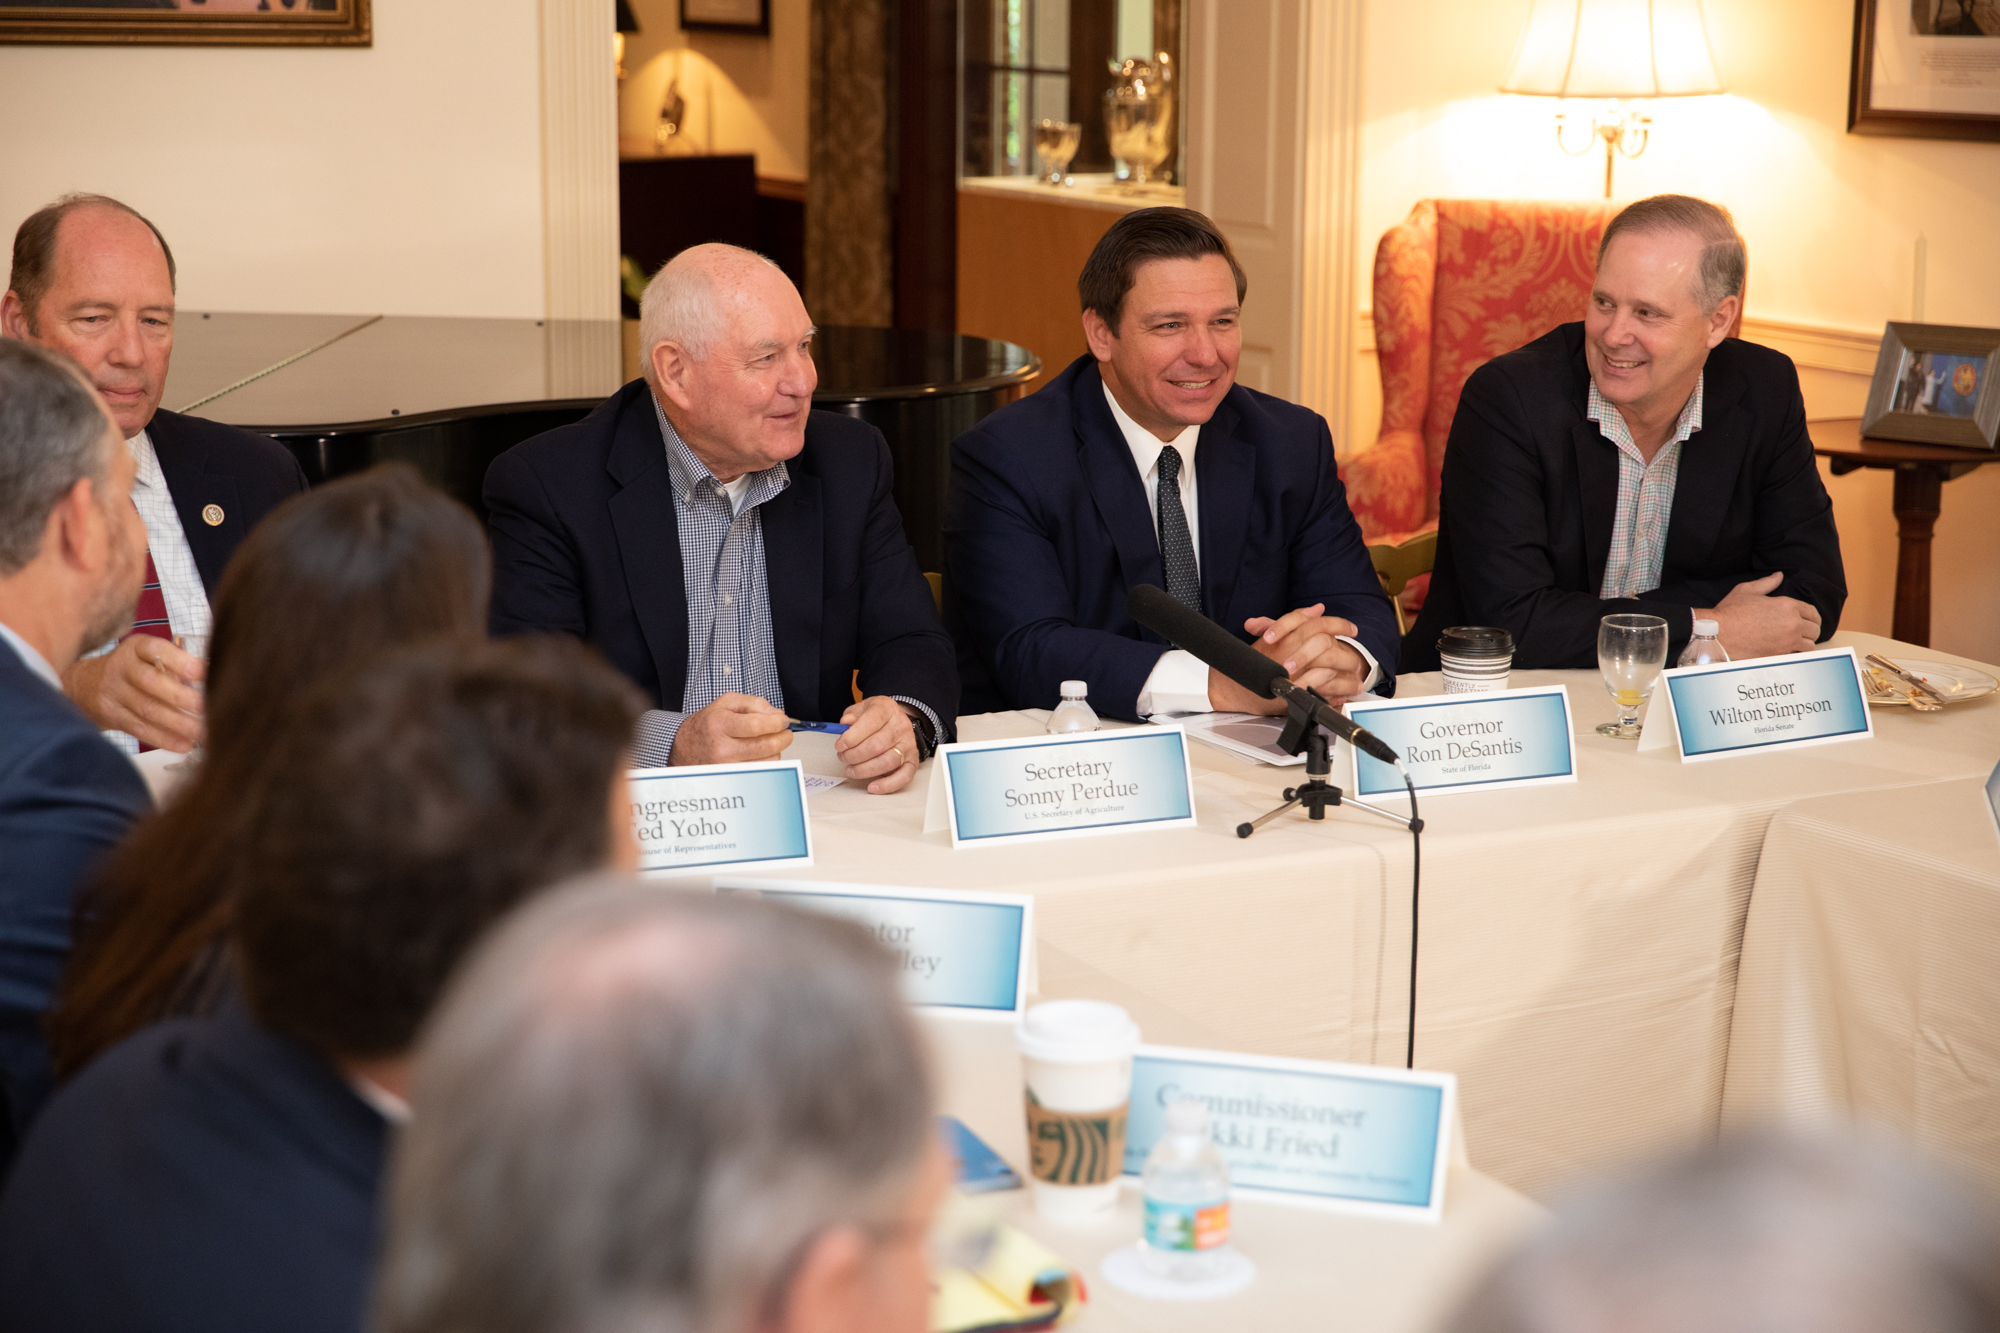   Governor Ron DeSantis Holds Roundtable on Timber Recovery with U.S. Secretary of Agriculture Sonny Perdue